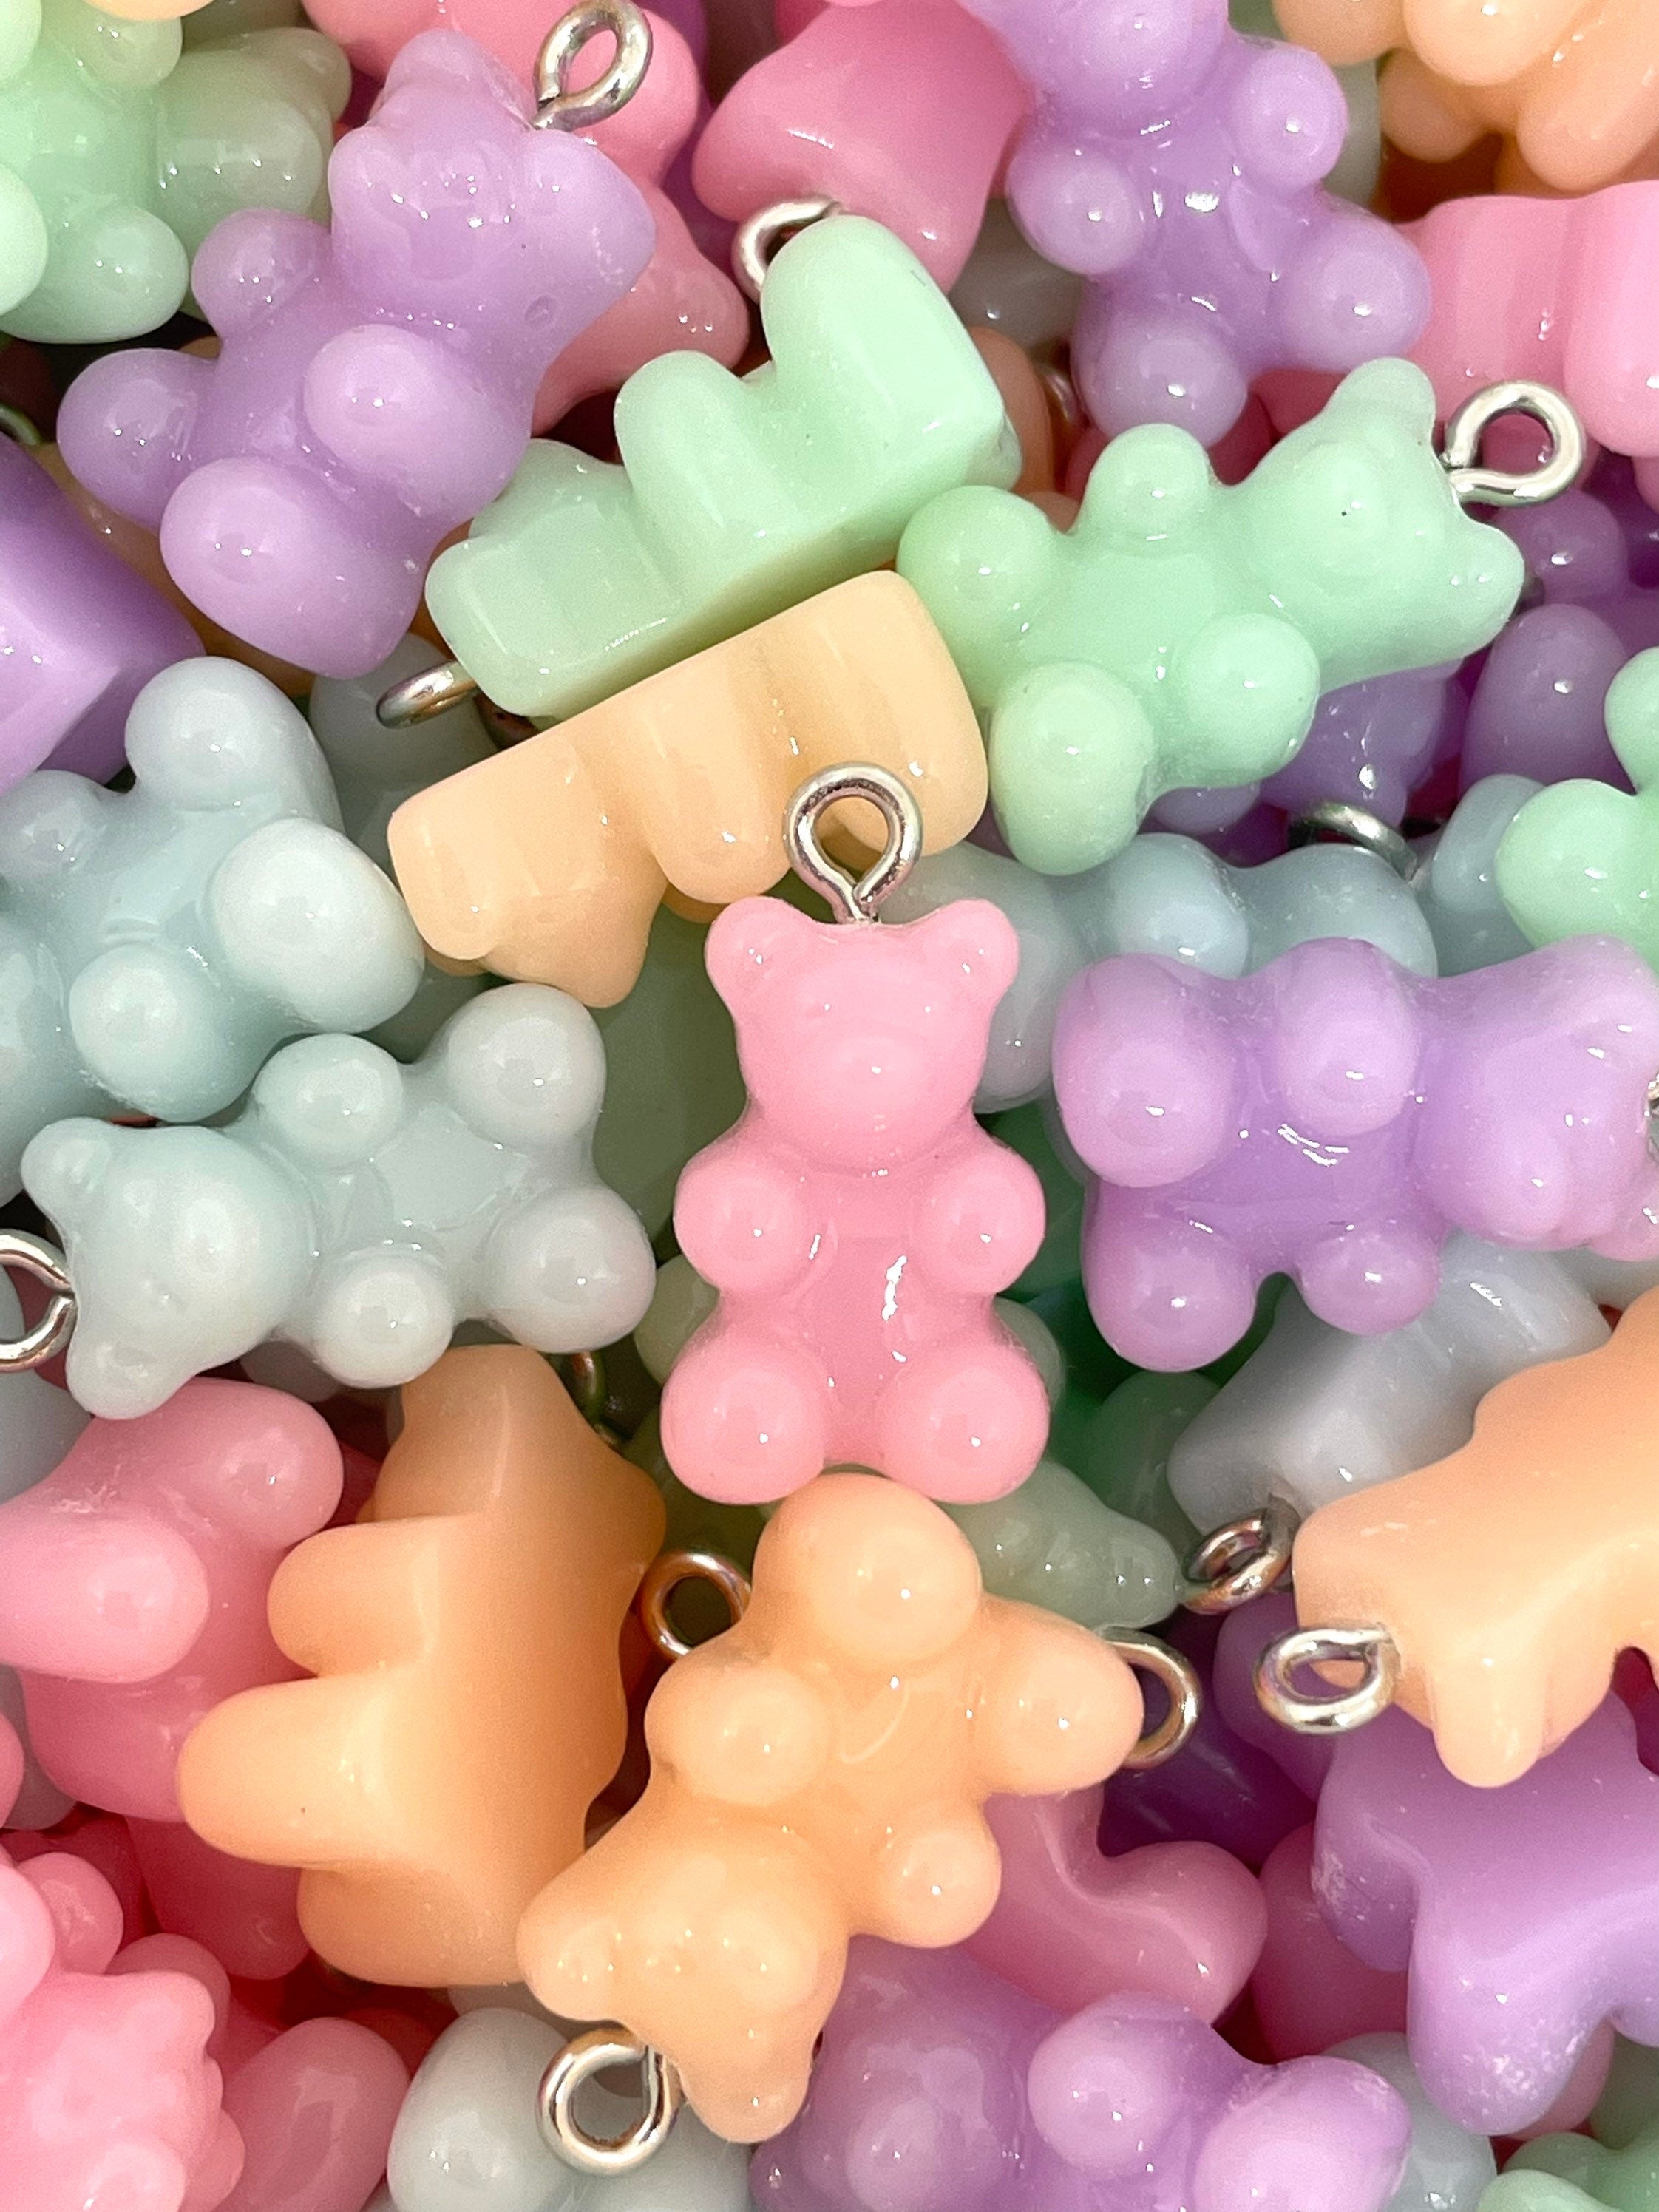 Kawaii Two Toned Resin Gummy Bear Charm, Pendant, for Necklace